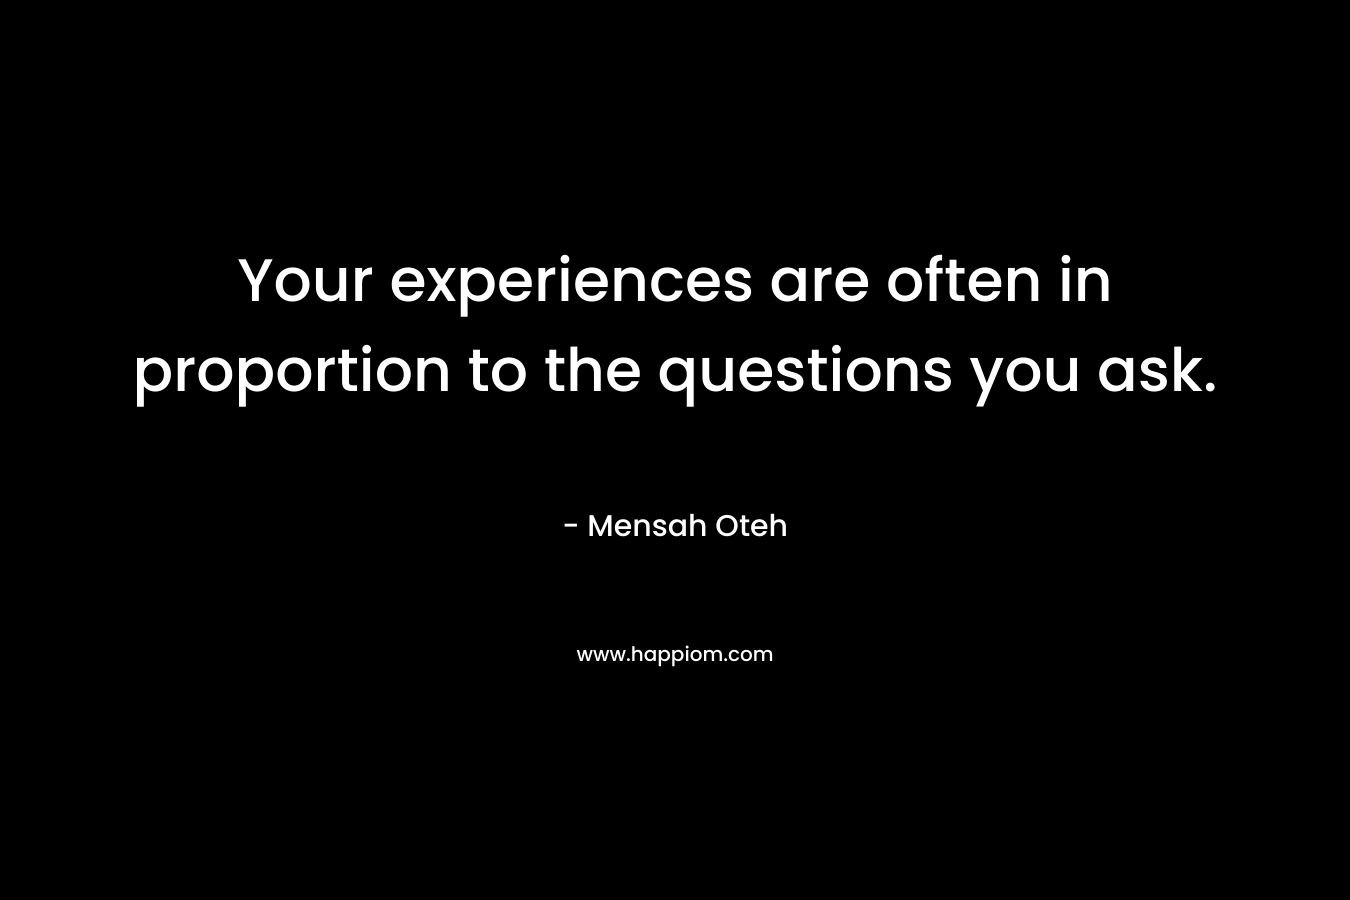 Your experiences are often in proportion to the questions you ask.